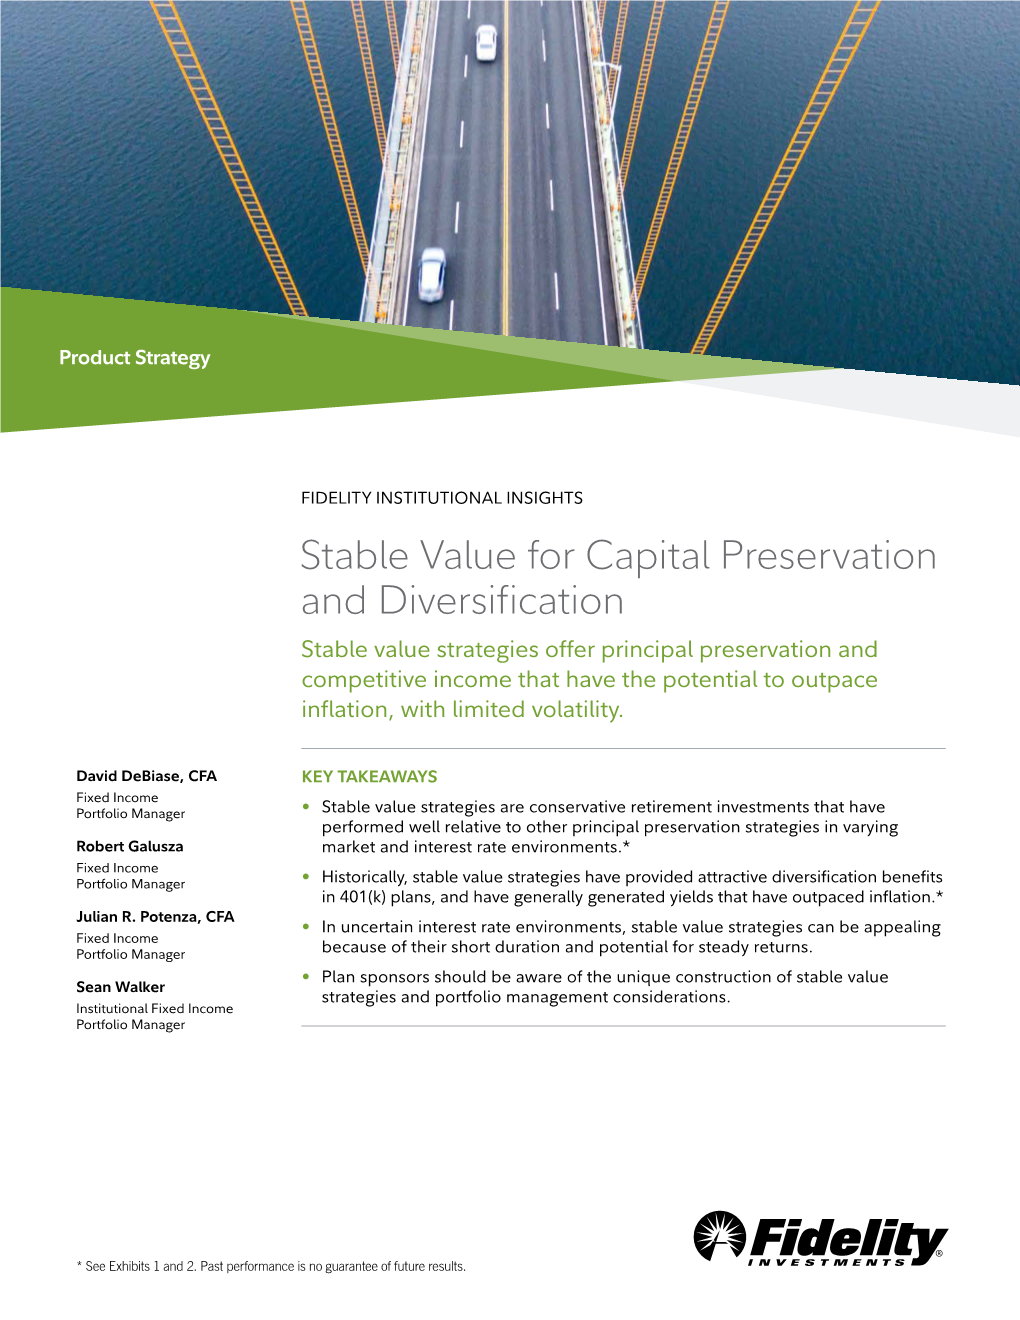 Stable Value for Capital Preservation and Diversification